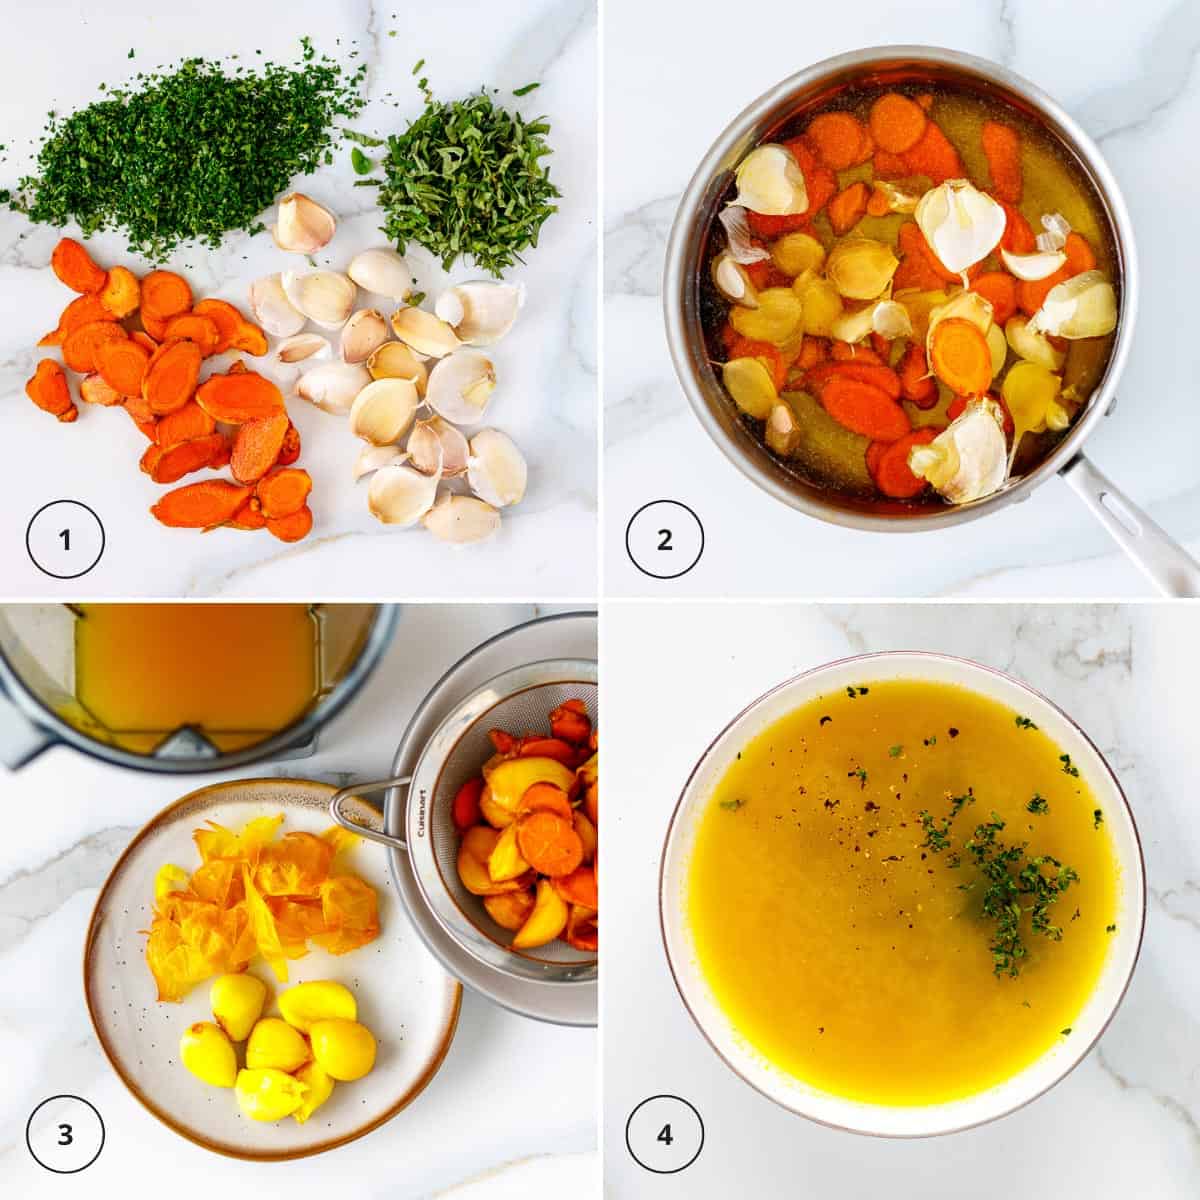 Boil turmeric and garlic , blend and stir in herbs with seasonings to make broth.